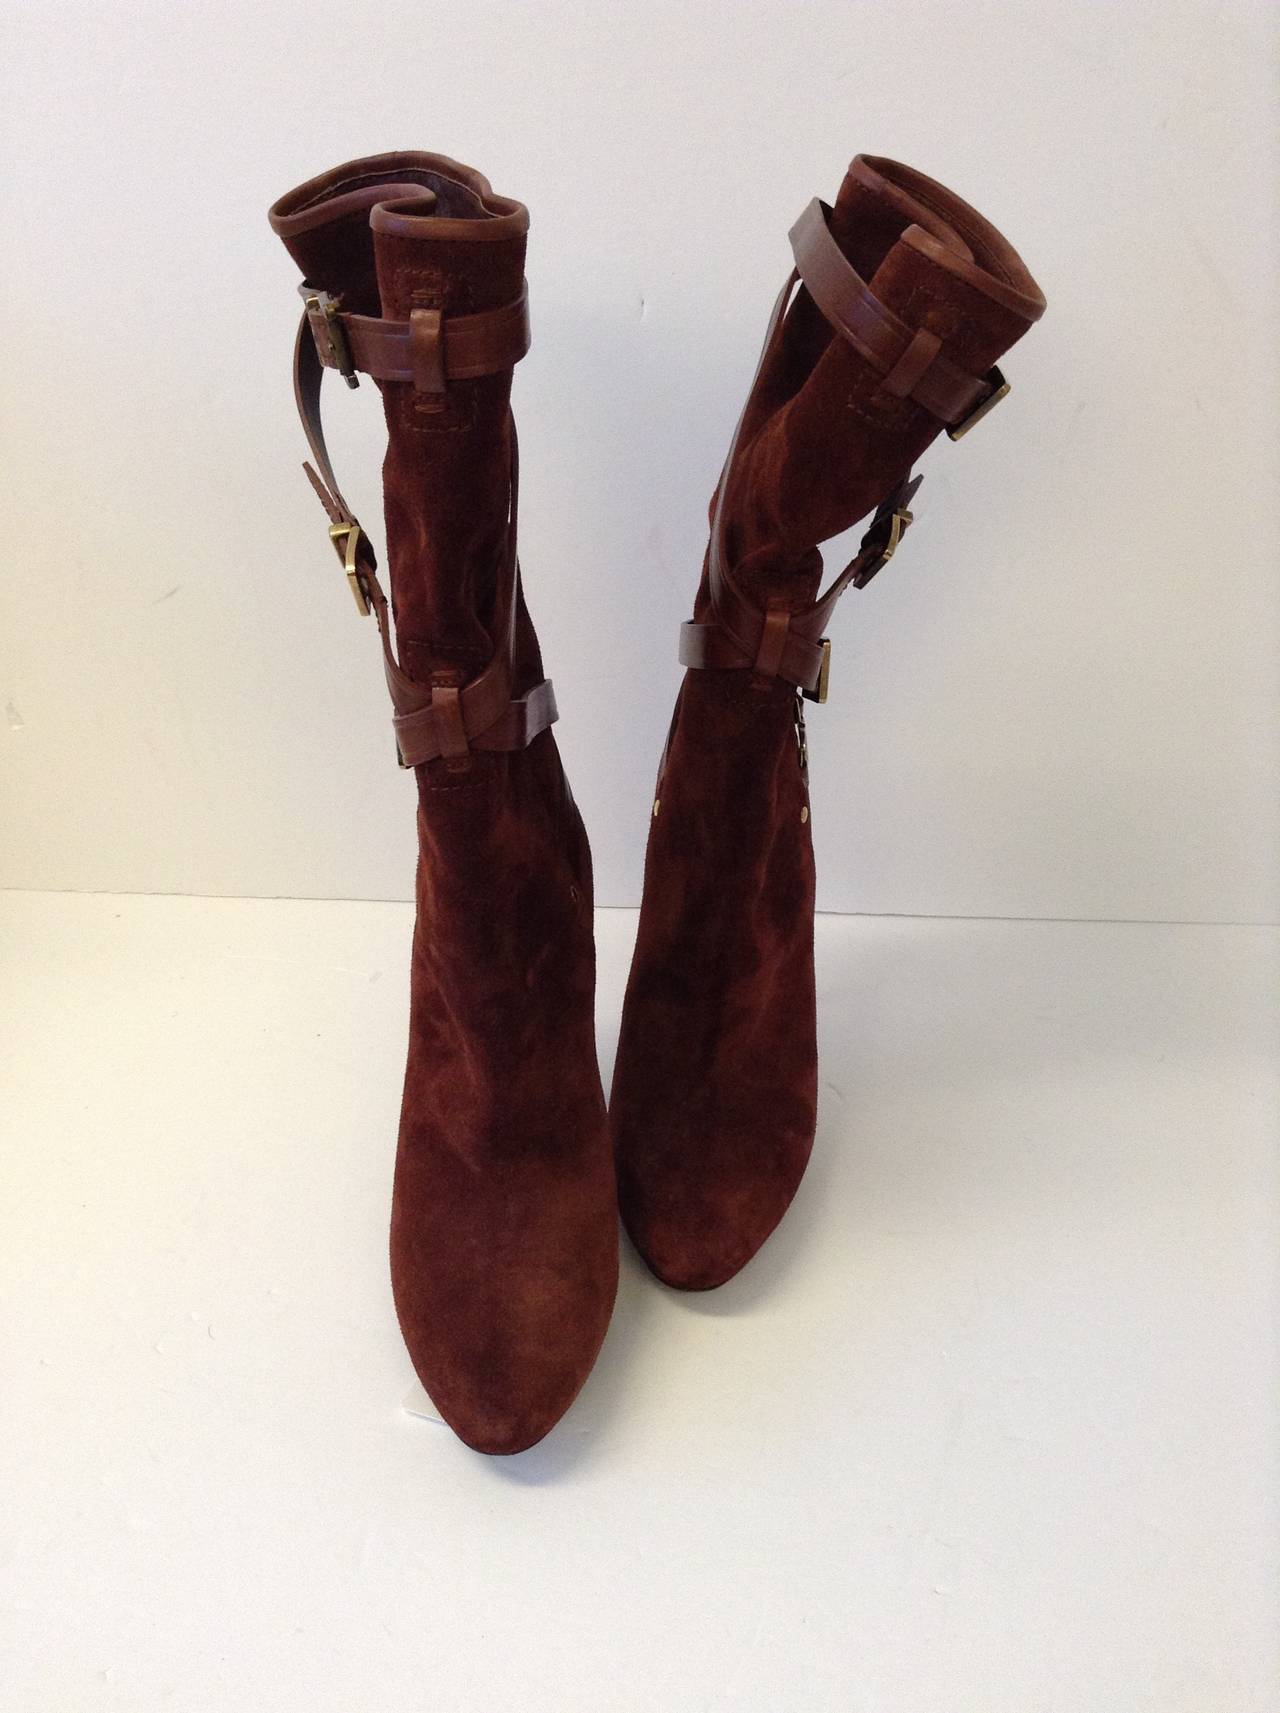 - Bordeau Colour 
- Suede 
- Featuring several buckles for aesthetic appeal
- Made in Italy
- Size 38.5
- Worn twice